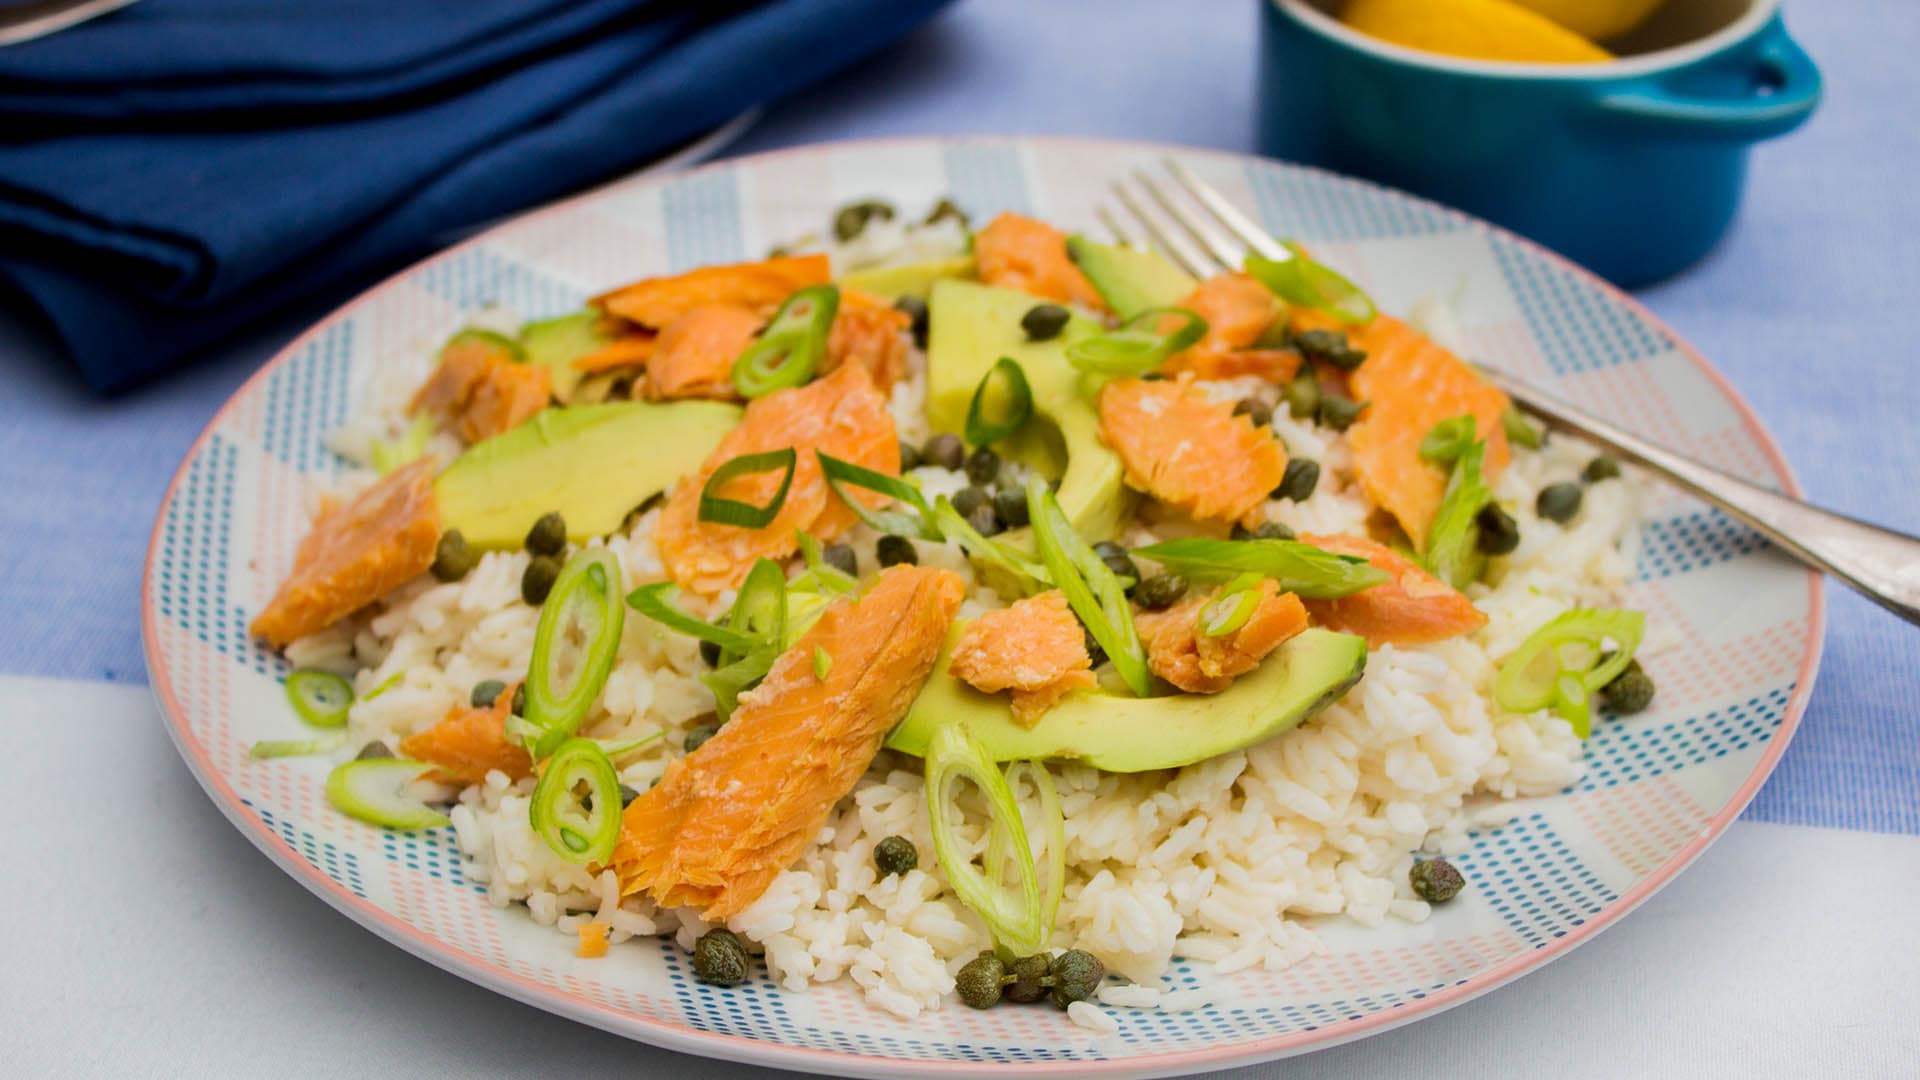 Salmon basmati salad with avocado and capers